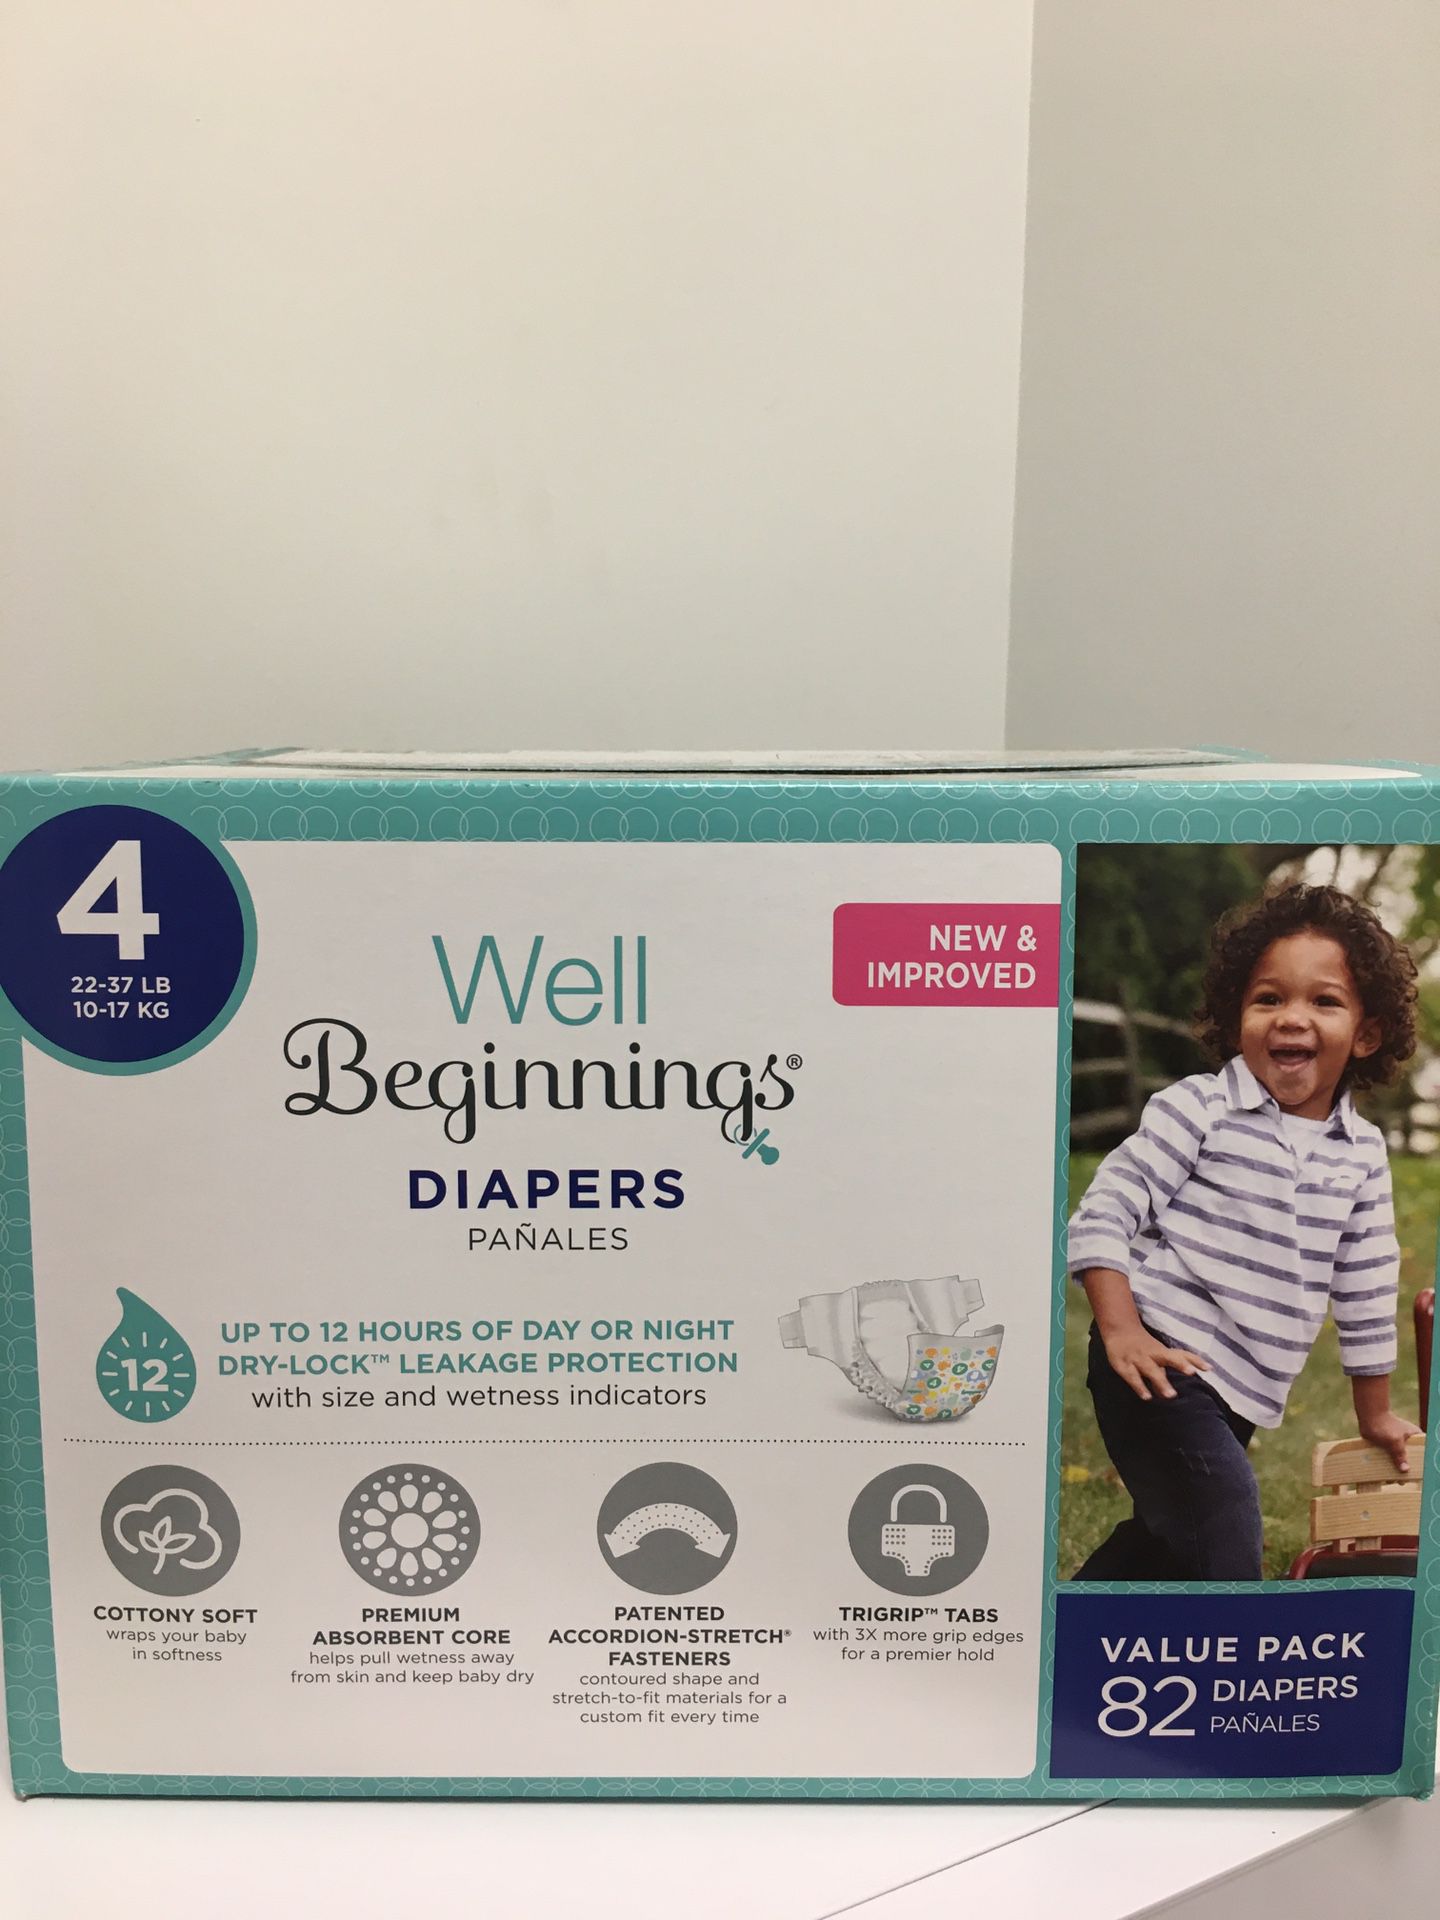 Well beginnings diapers size 4 82 count for sale $10